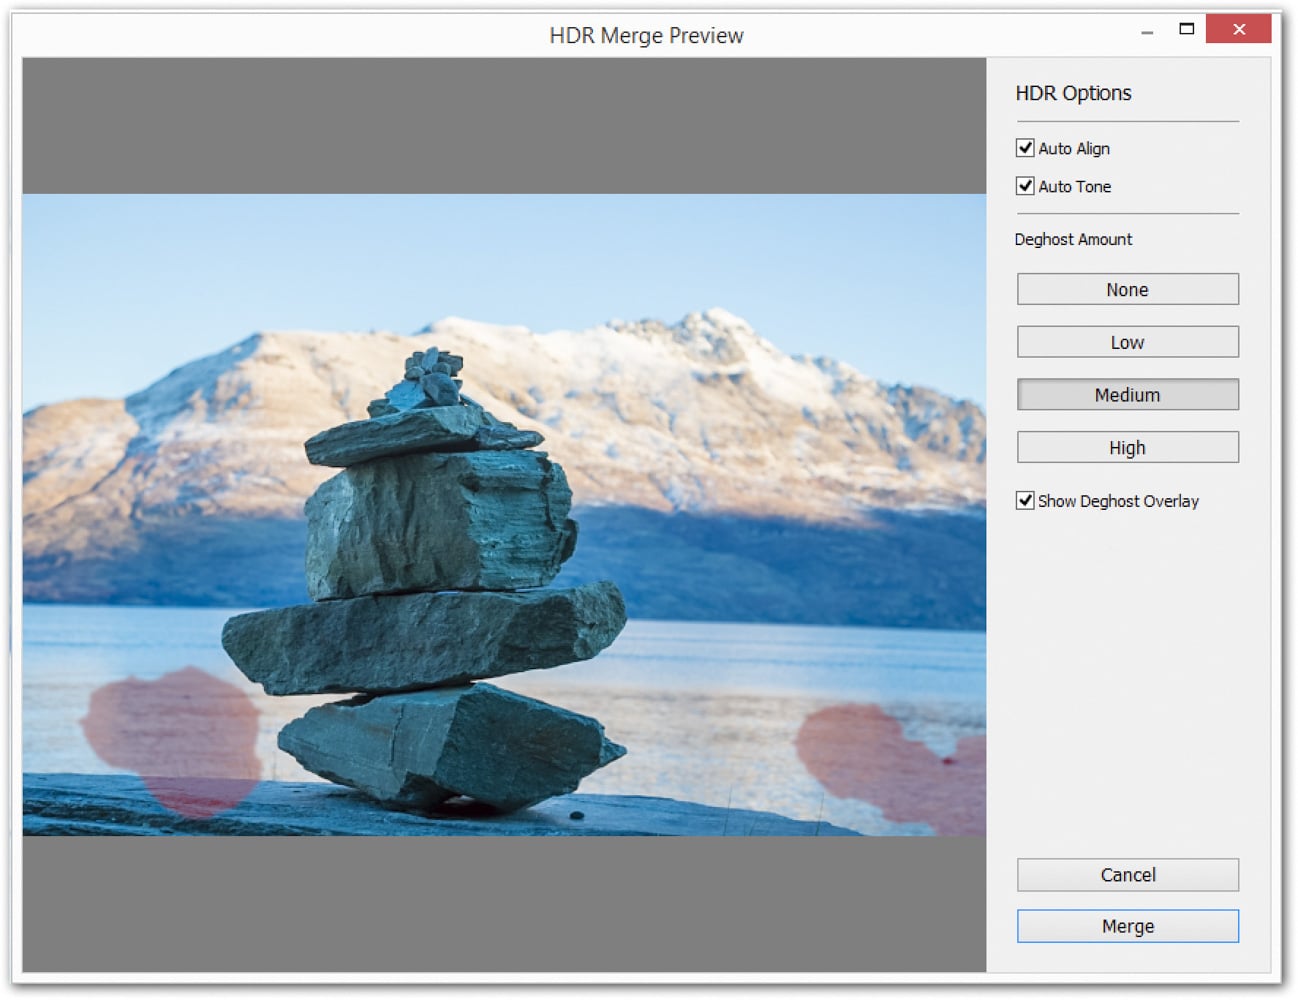 Image 4 — HDR options with deghost overlays